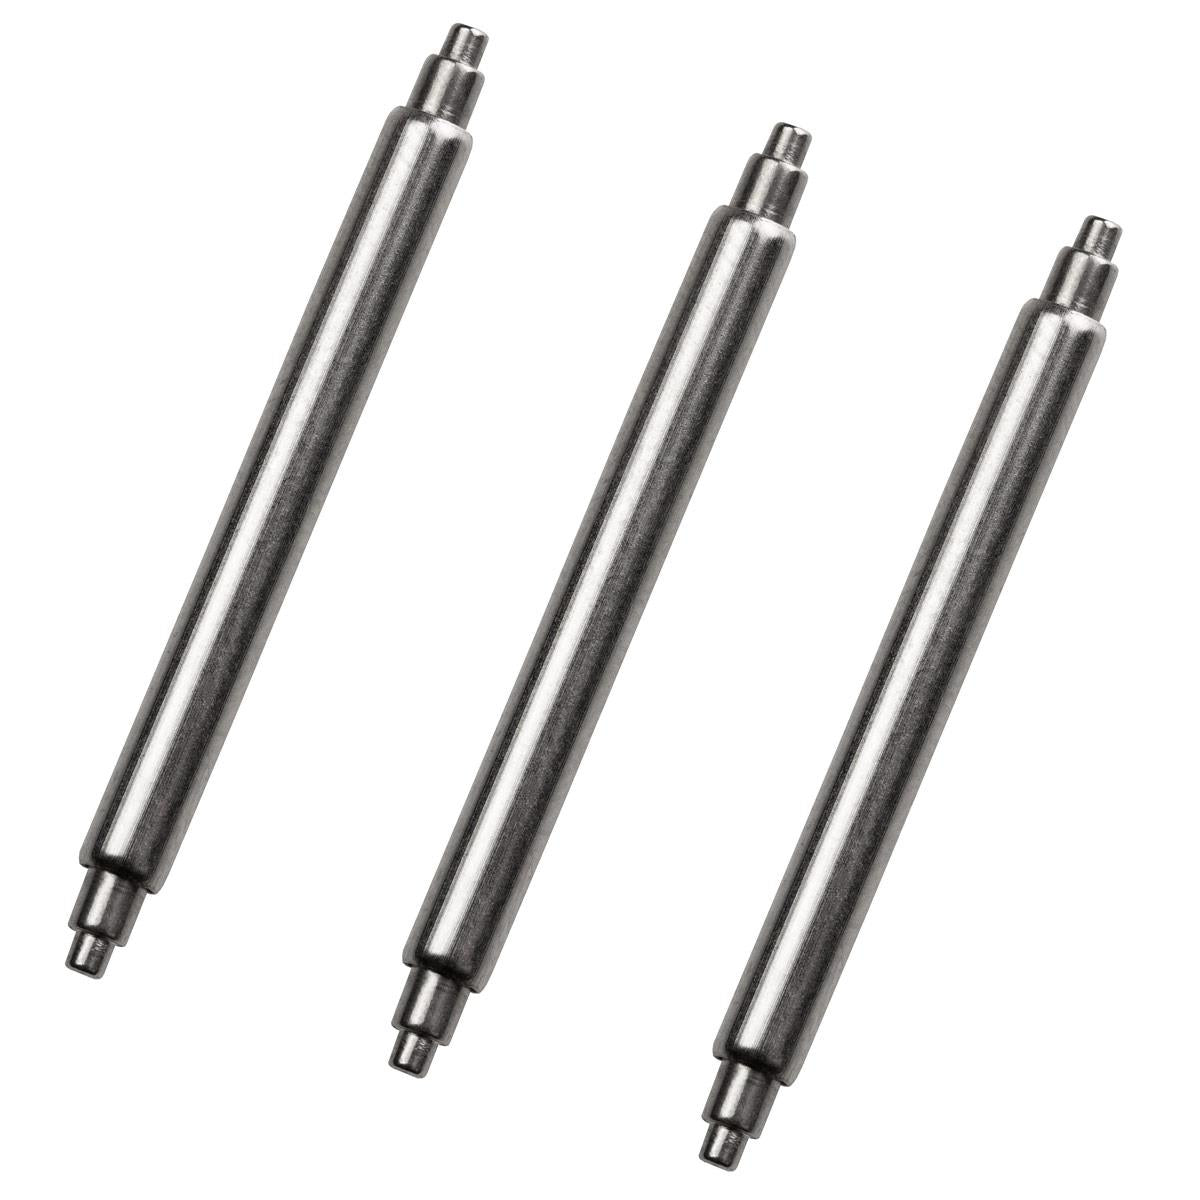 Seiko Style "Fat" 2.5mm Spring Bars